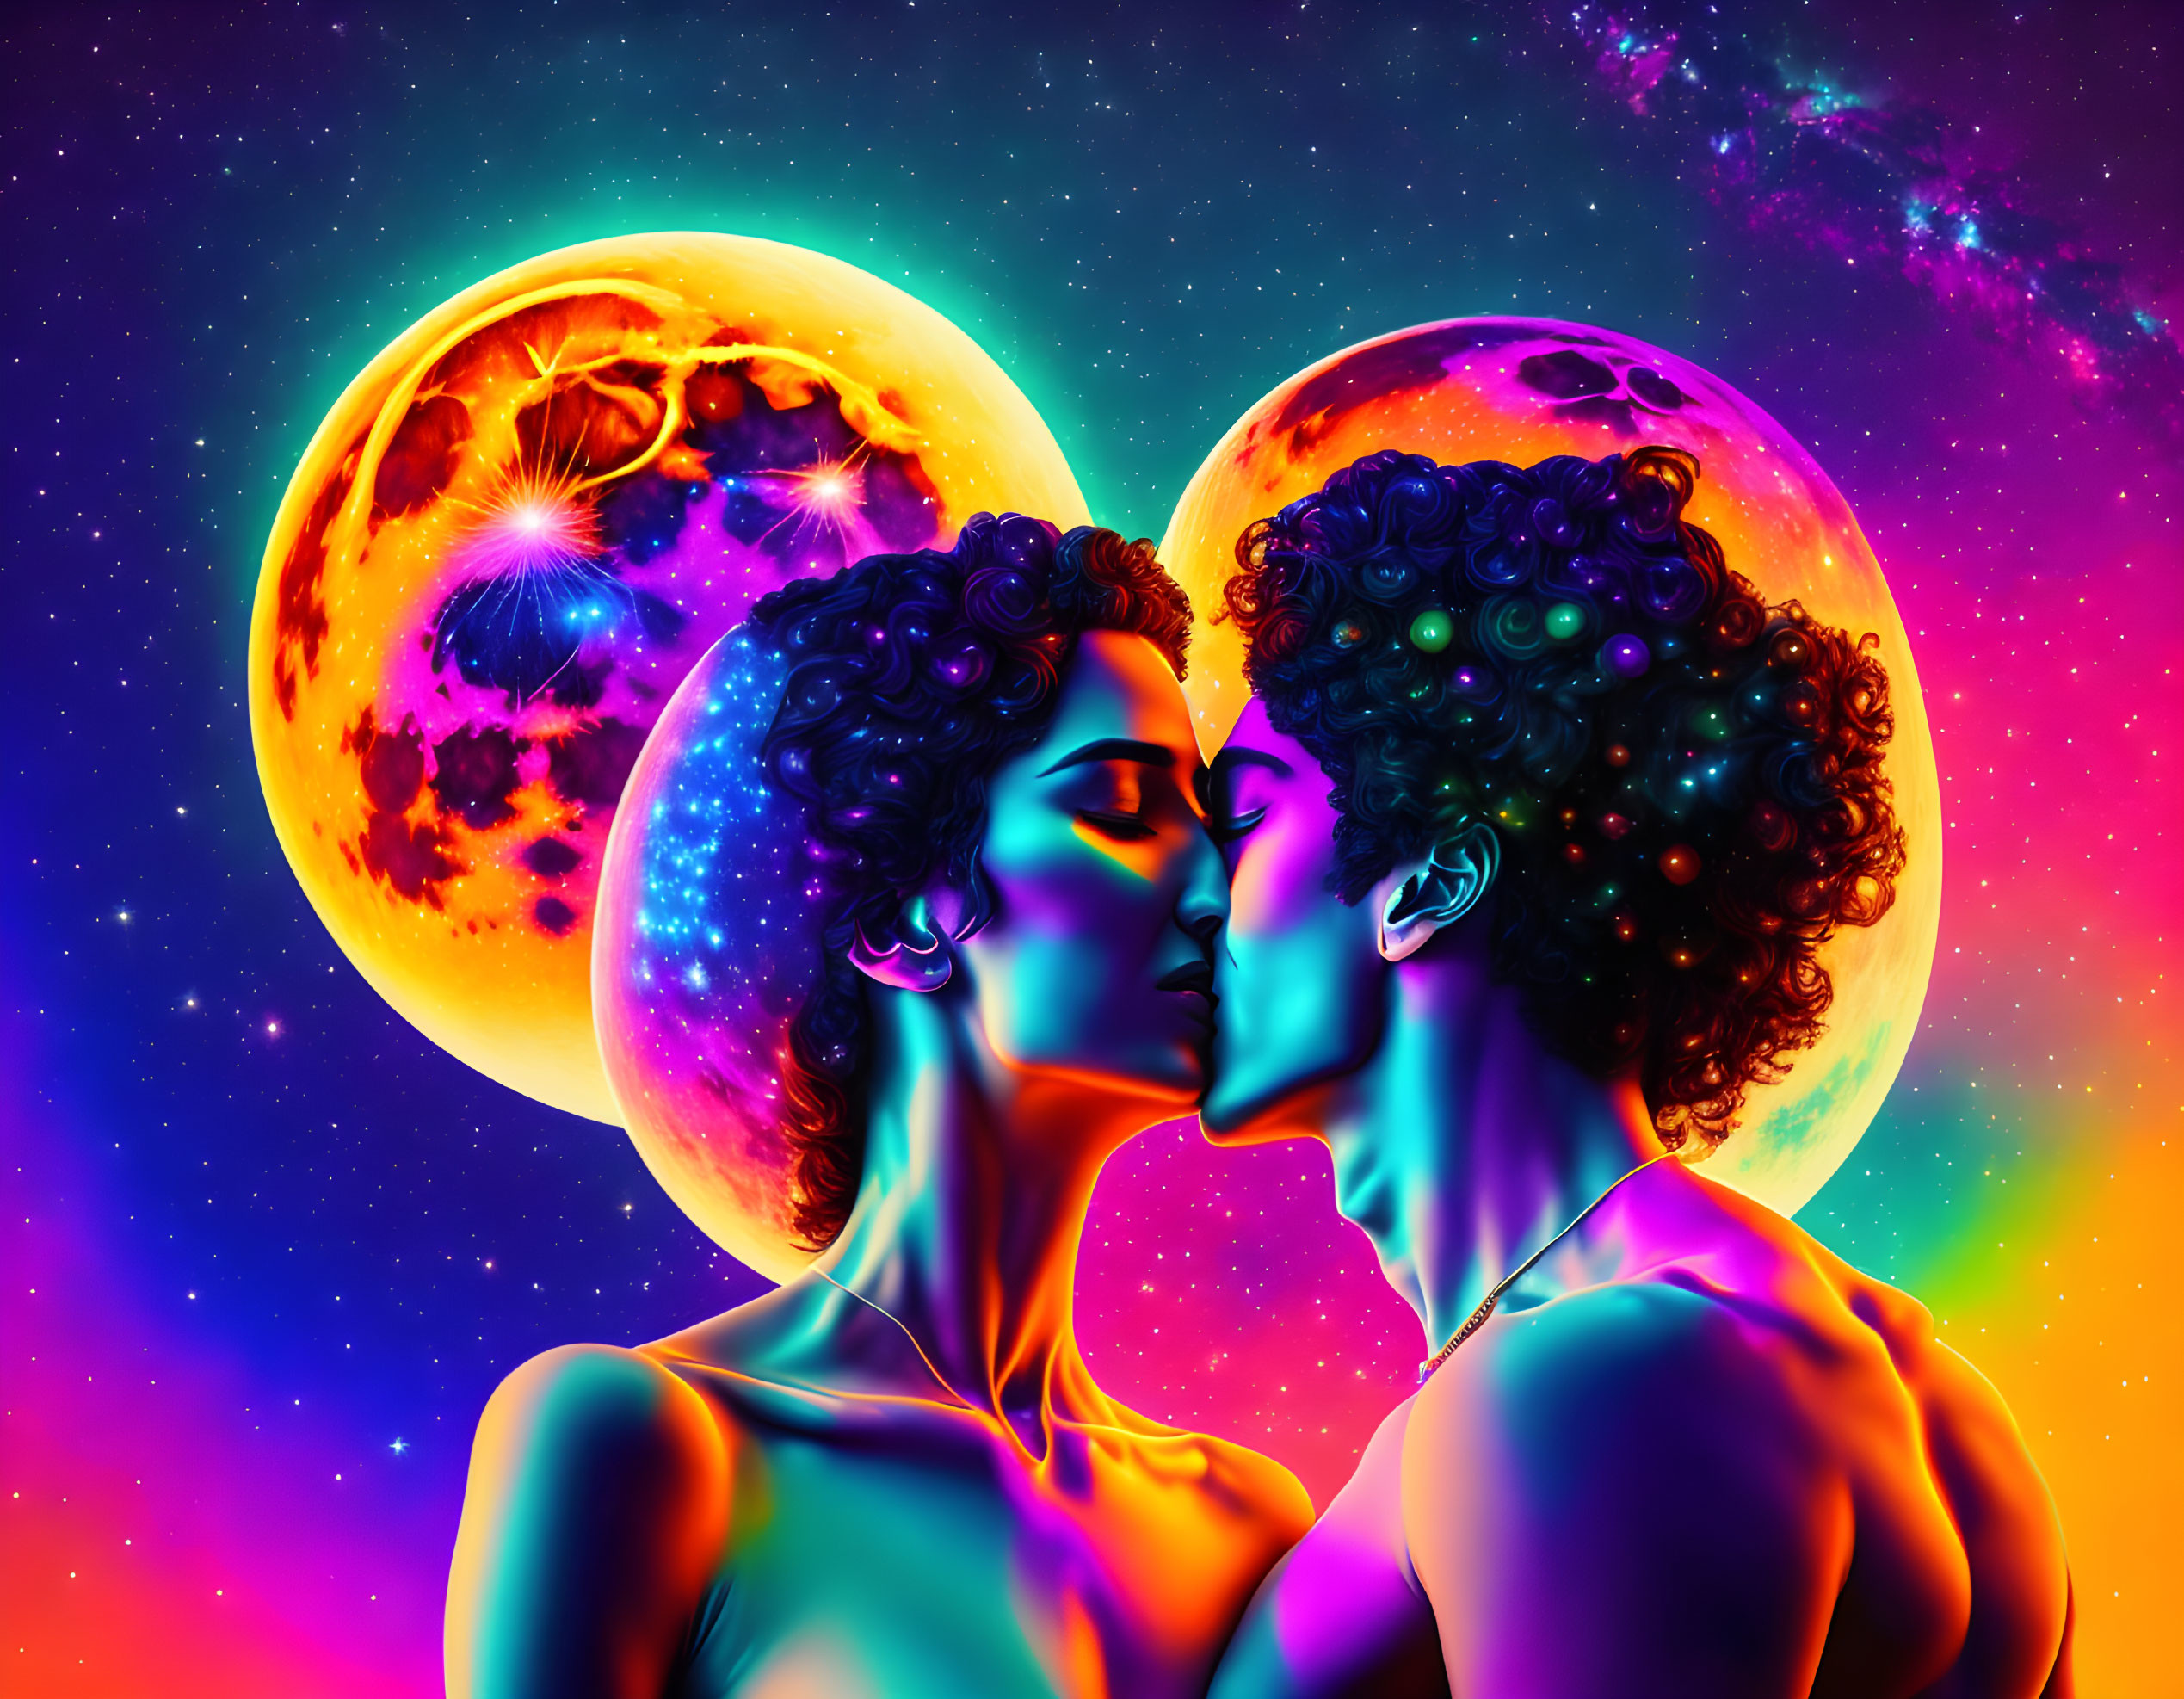 Two lovers embracing each other under a moon